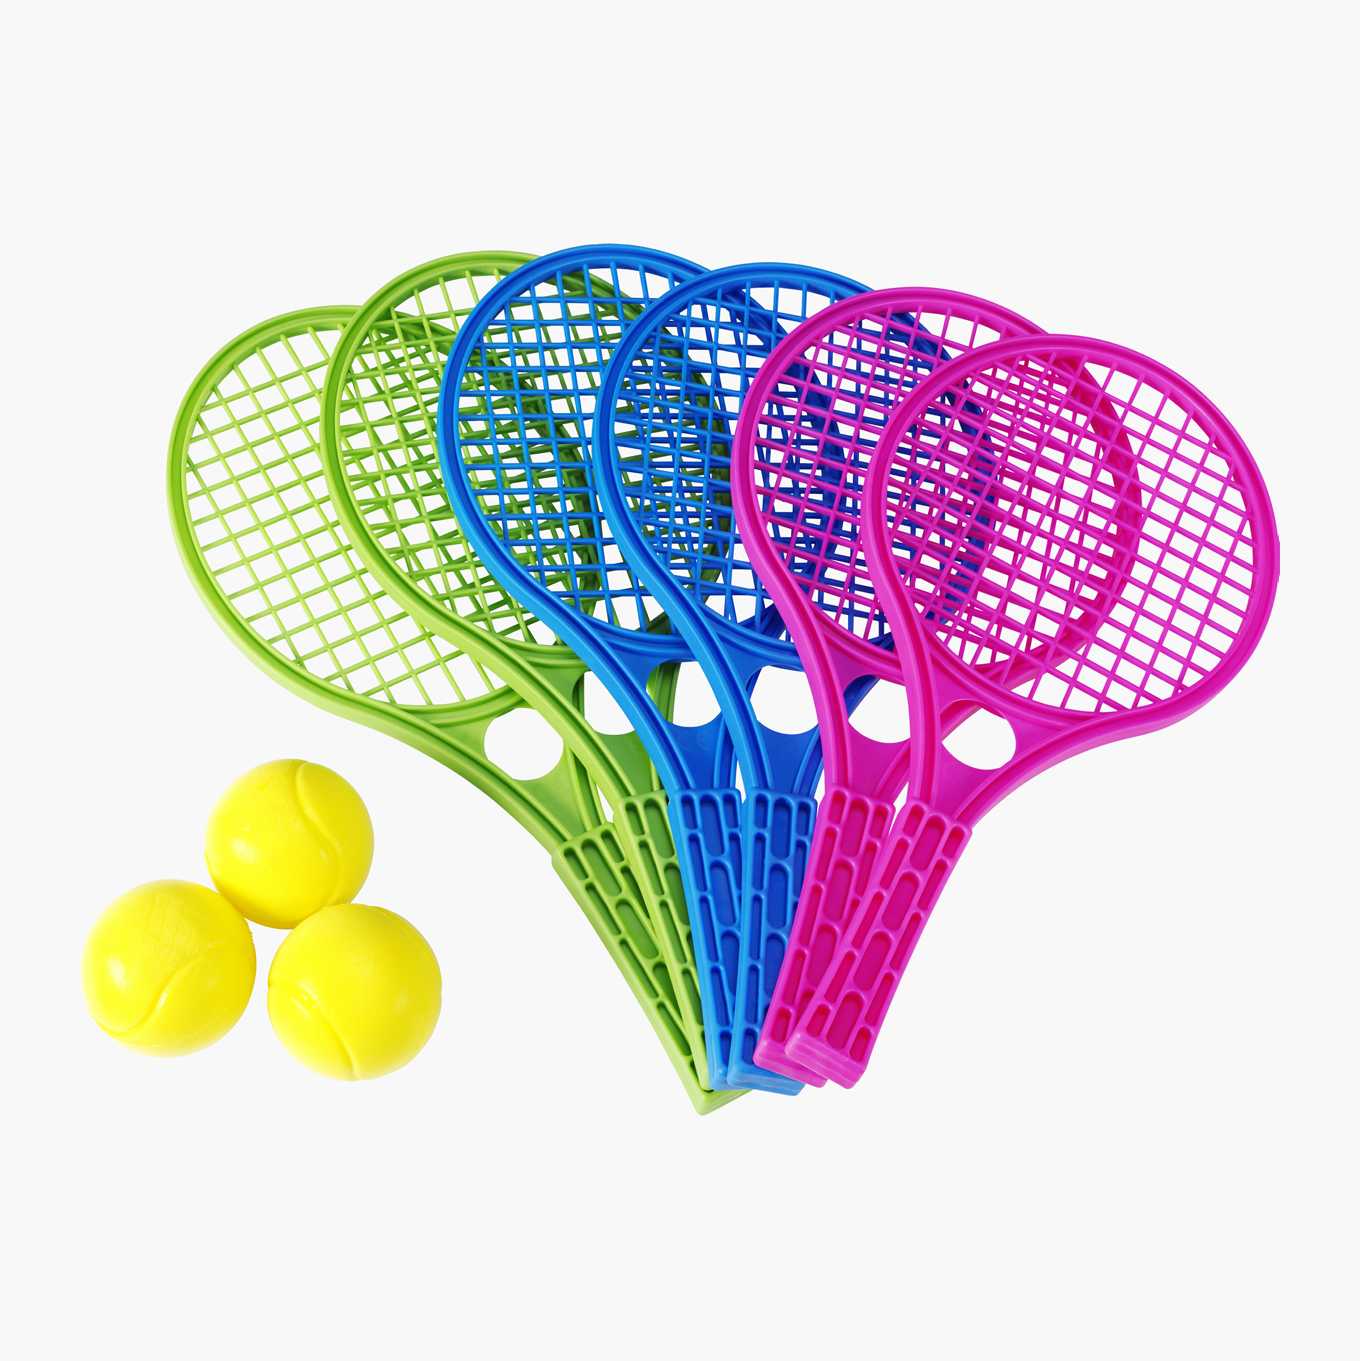 Junior 2 Player Tennis Set 2 Racket Raquets and 2 Balls Outdoor Toy Play Game Set 06175